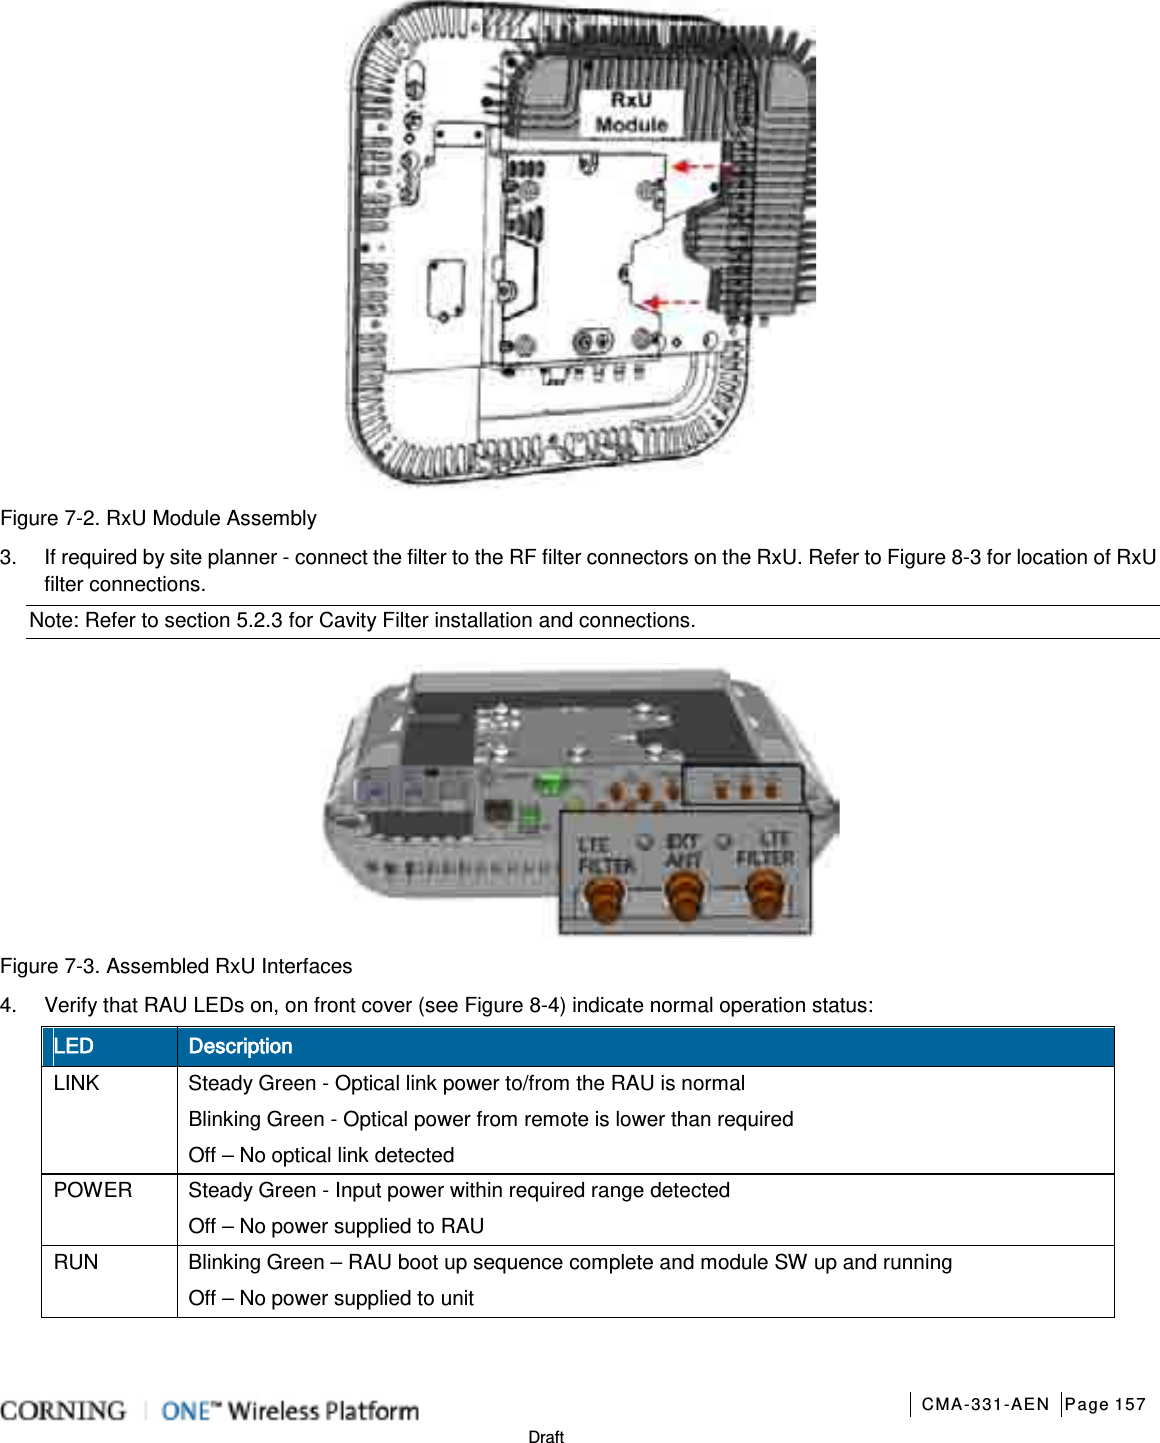       CMA-331-AEN Page 157  Draft  Figure  7-2. RxU Module Assembly 3.  If required by site planner - connect the filter to the RF filter connectors on the RxU. Refer to Figure  8-3 for location of RxU filter connections.   Note: Refer to section  5.2.3 for Cavity Filter installation and connections.  Figure  7-3. Assembled RxU Interfaces 4.  Verify that RAU LEDs on, on front cover (see Figure  8-4) indicate normal operation status:   LED Description LINK   Steady Green - Optical link power to/from the RAU is normal   Blinking Green - Optical power from remote is lower than required Off – No optical link detected POWER Steady Green - Input power within required range detected Off – No power supplied to RAU RUN   Blinking Green – RAU boot up sequence complete and module SW up and running Off – No power supplied to unit  